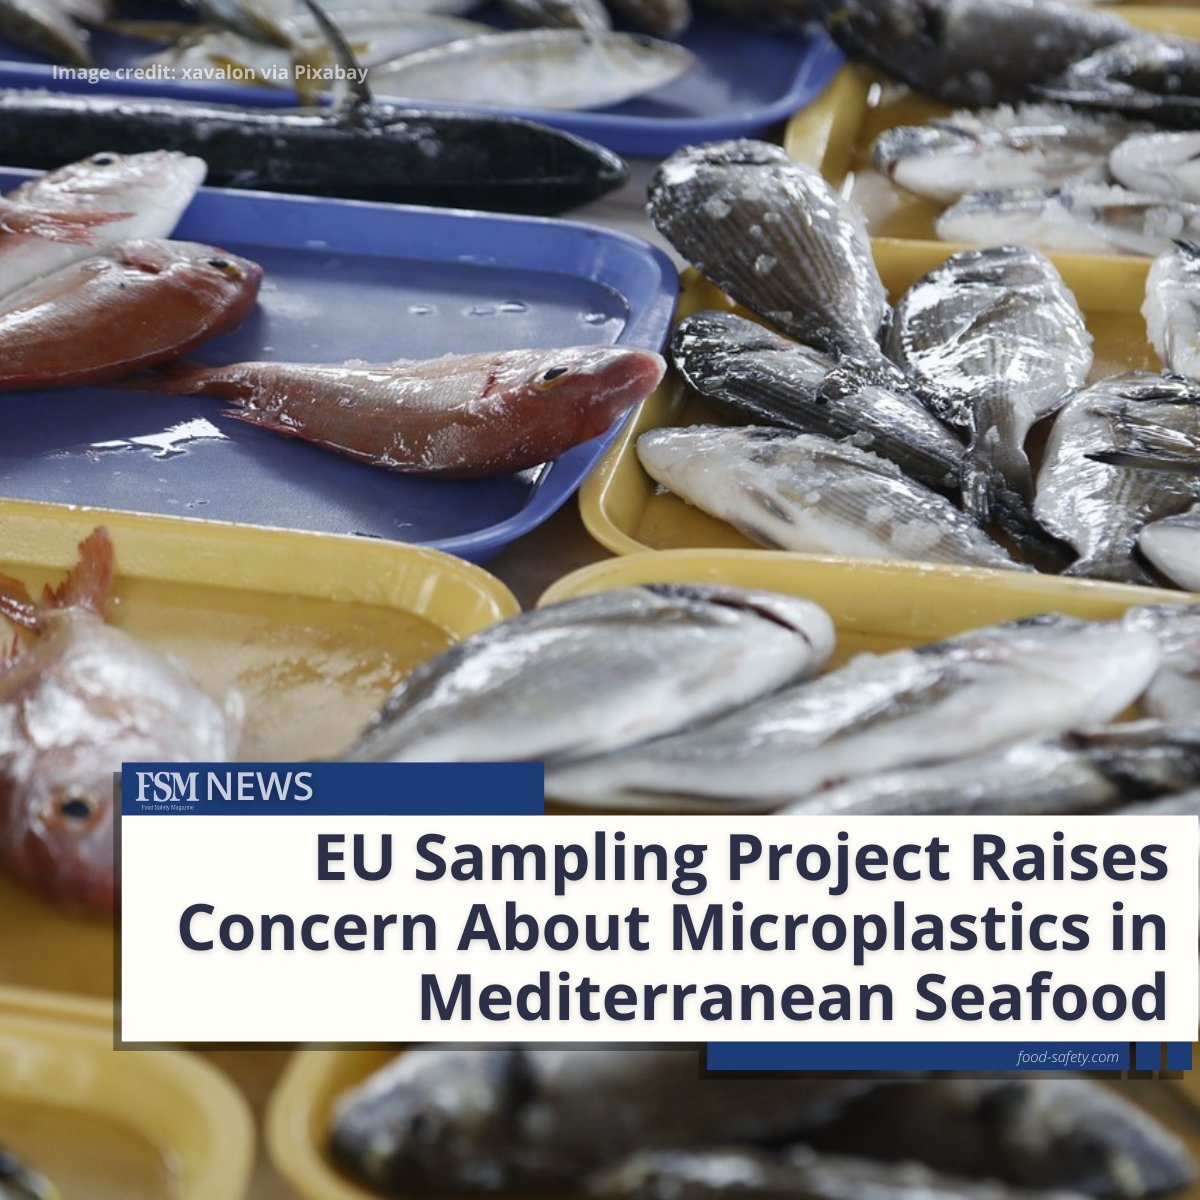 🎣 An EU project that monitors contaminants in Mediterranean fishing regions/seafood species discovered concerning levels of #microplastics in the guts and stomachs of some fish.

👉 The presence of other analyzed substances was low, however: brnw.ch/21wJxlk

#foodsafety